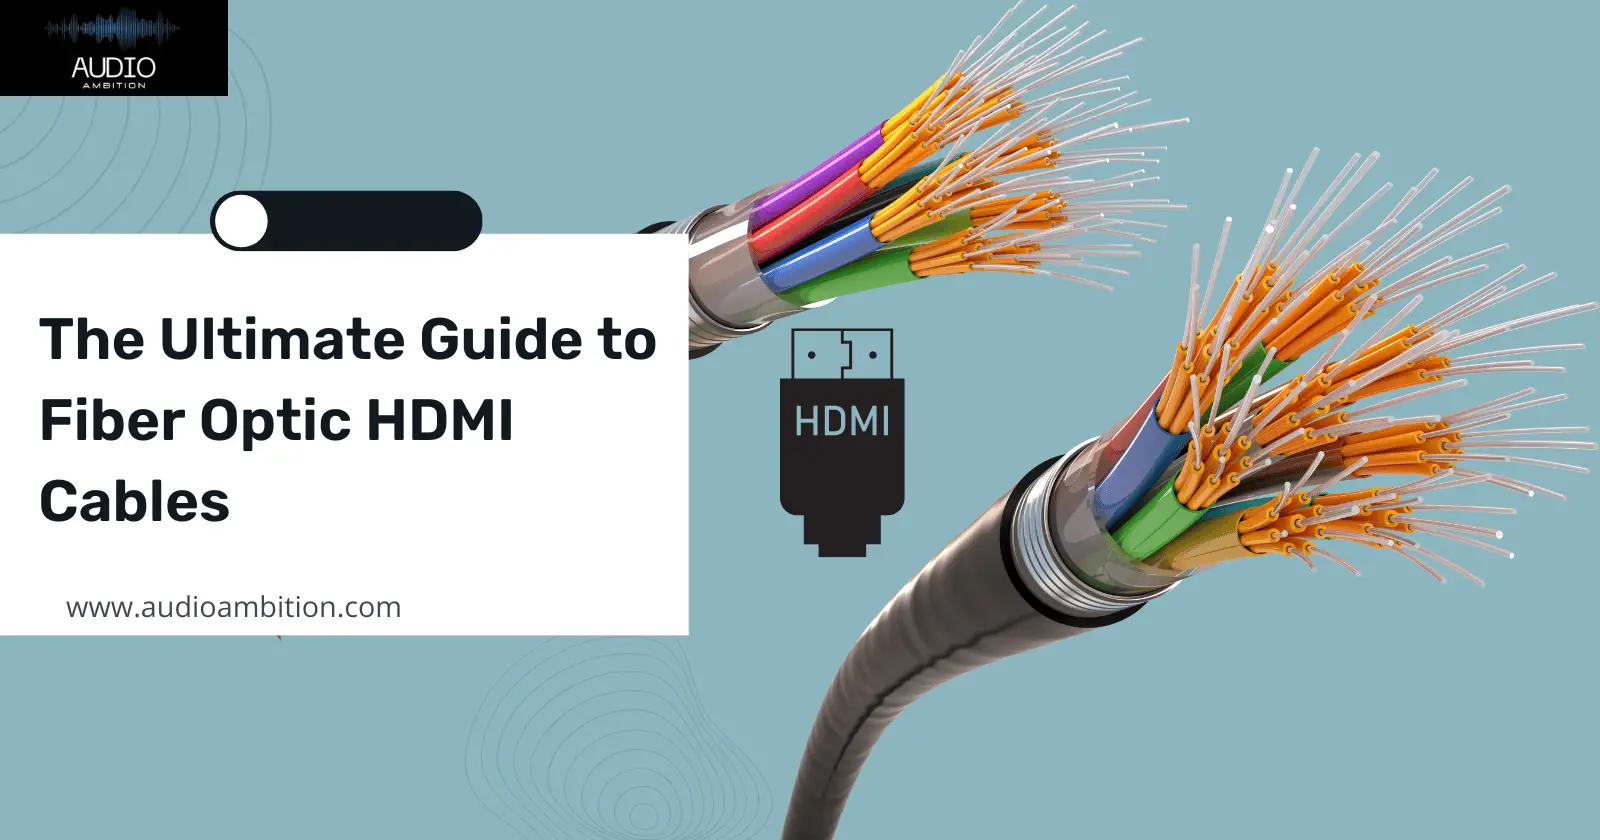 The Ultimate Guide to Fiber Optic HDMI Cables